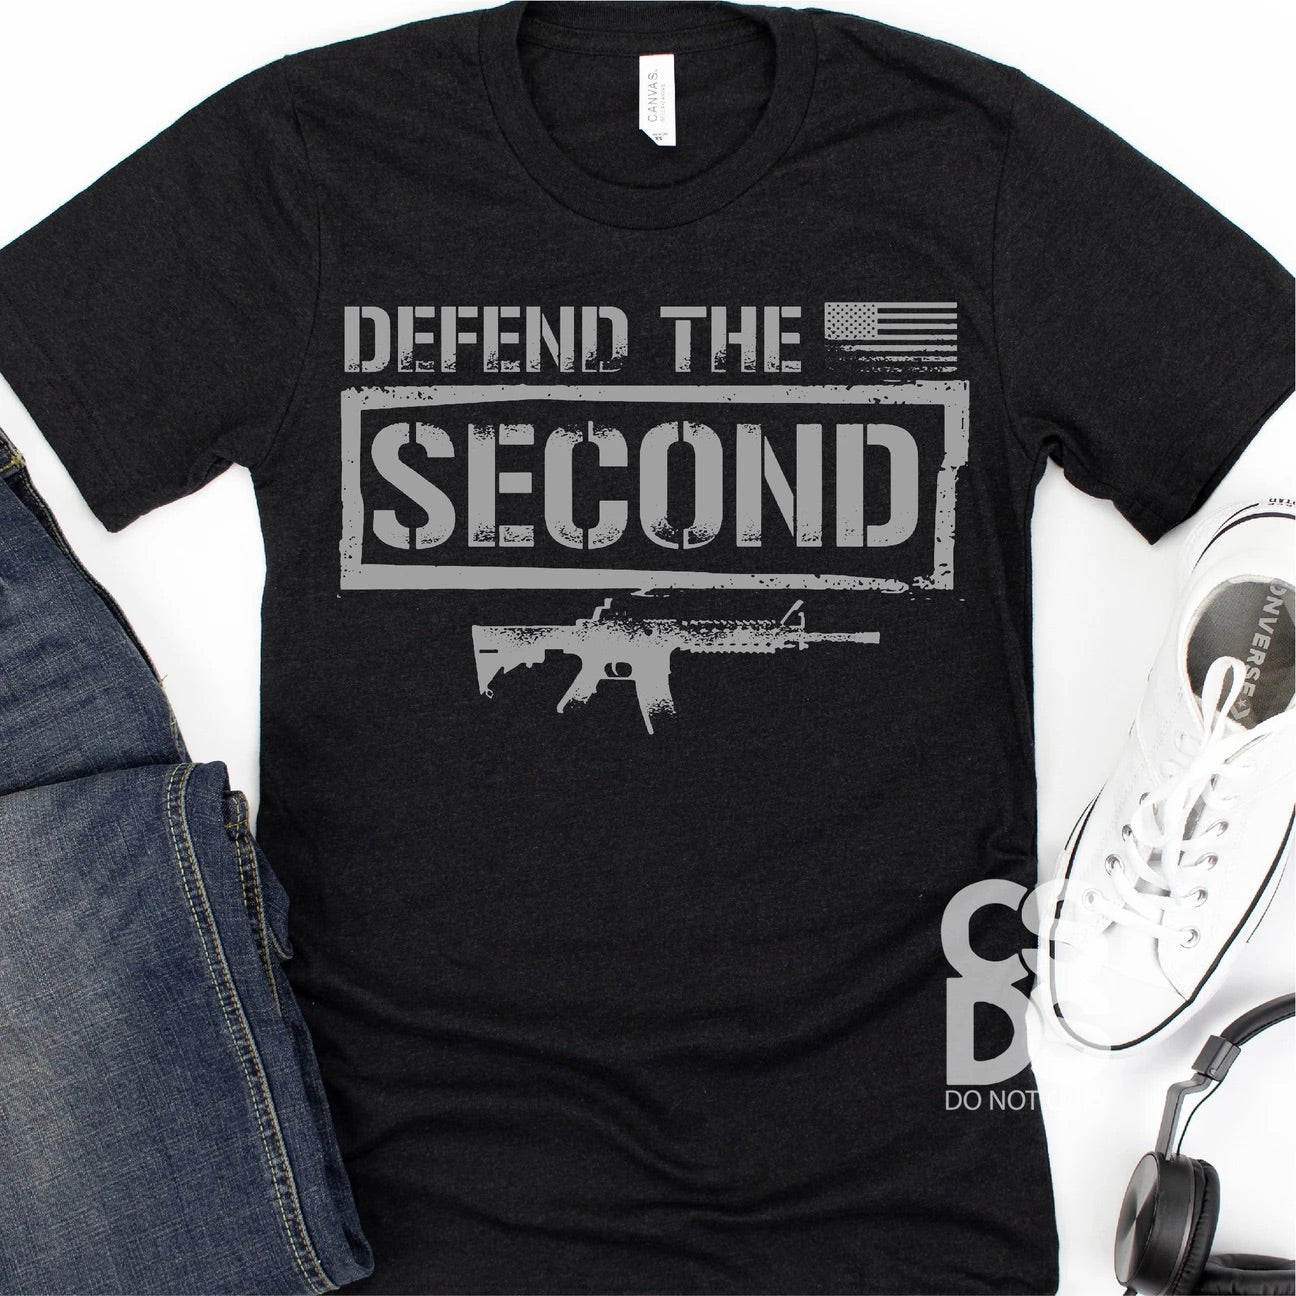 Defend the Second graphic top